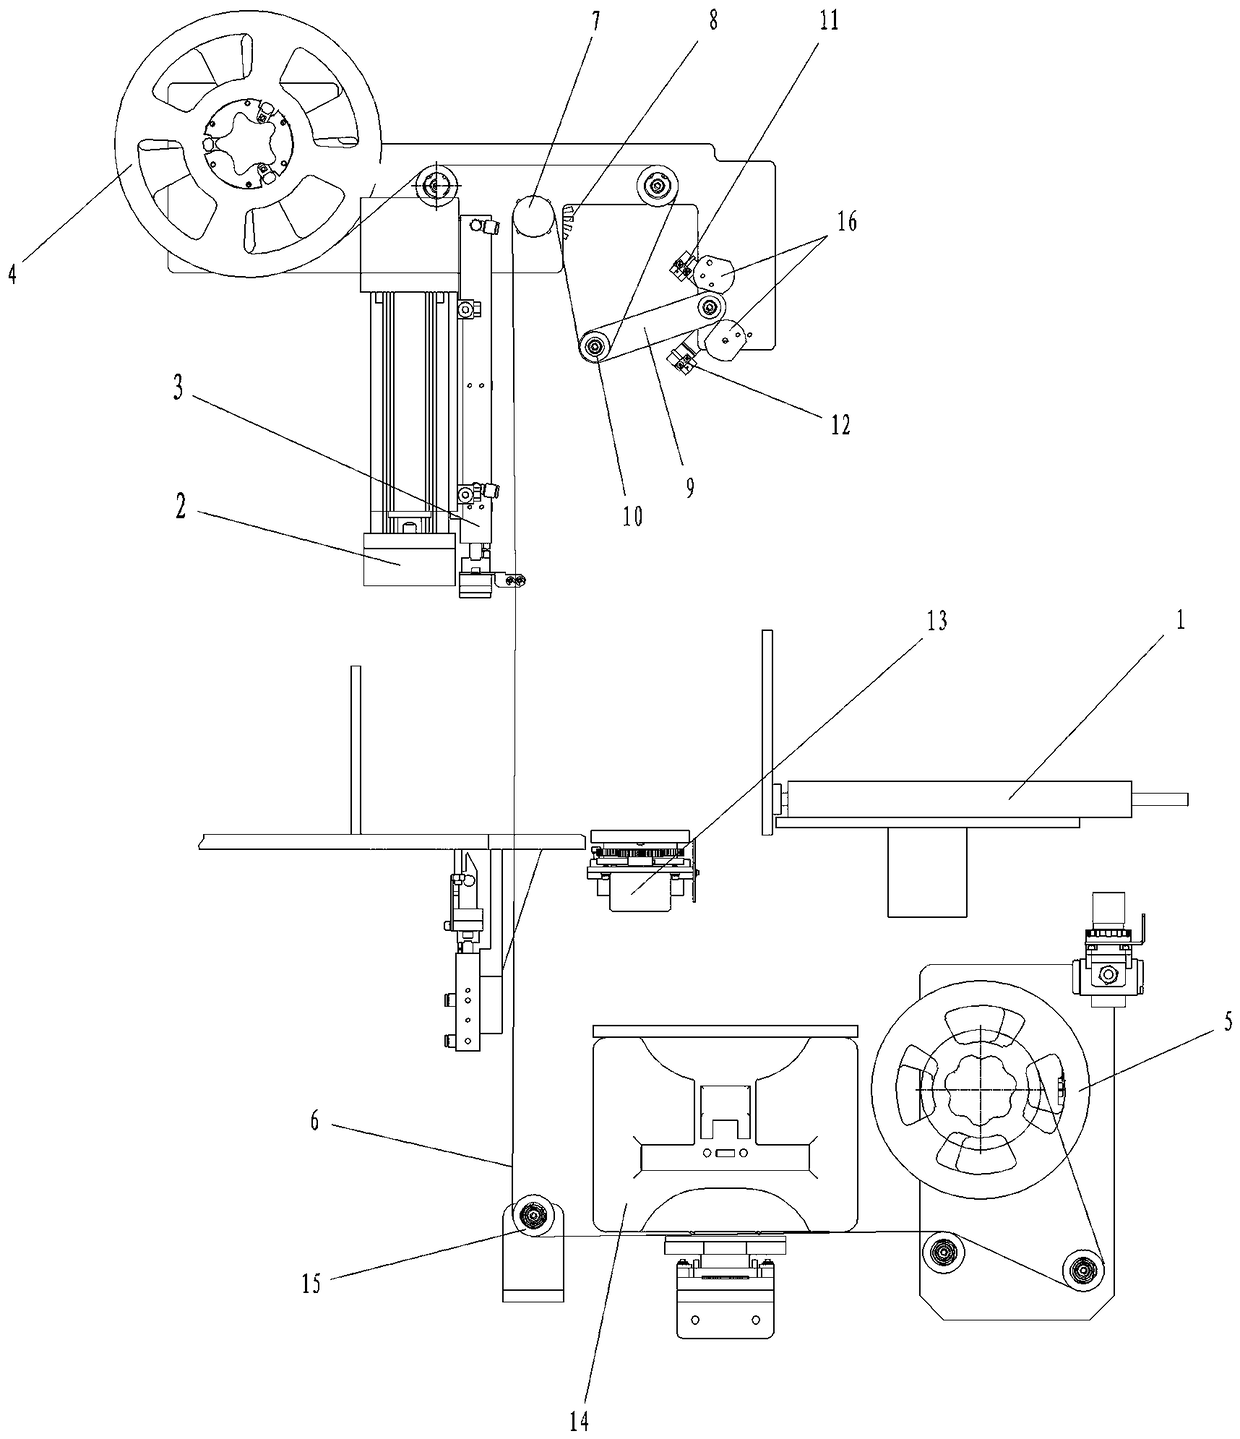 A banknote pre-wrapping device and a control method for the pre-wrapping film